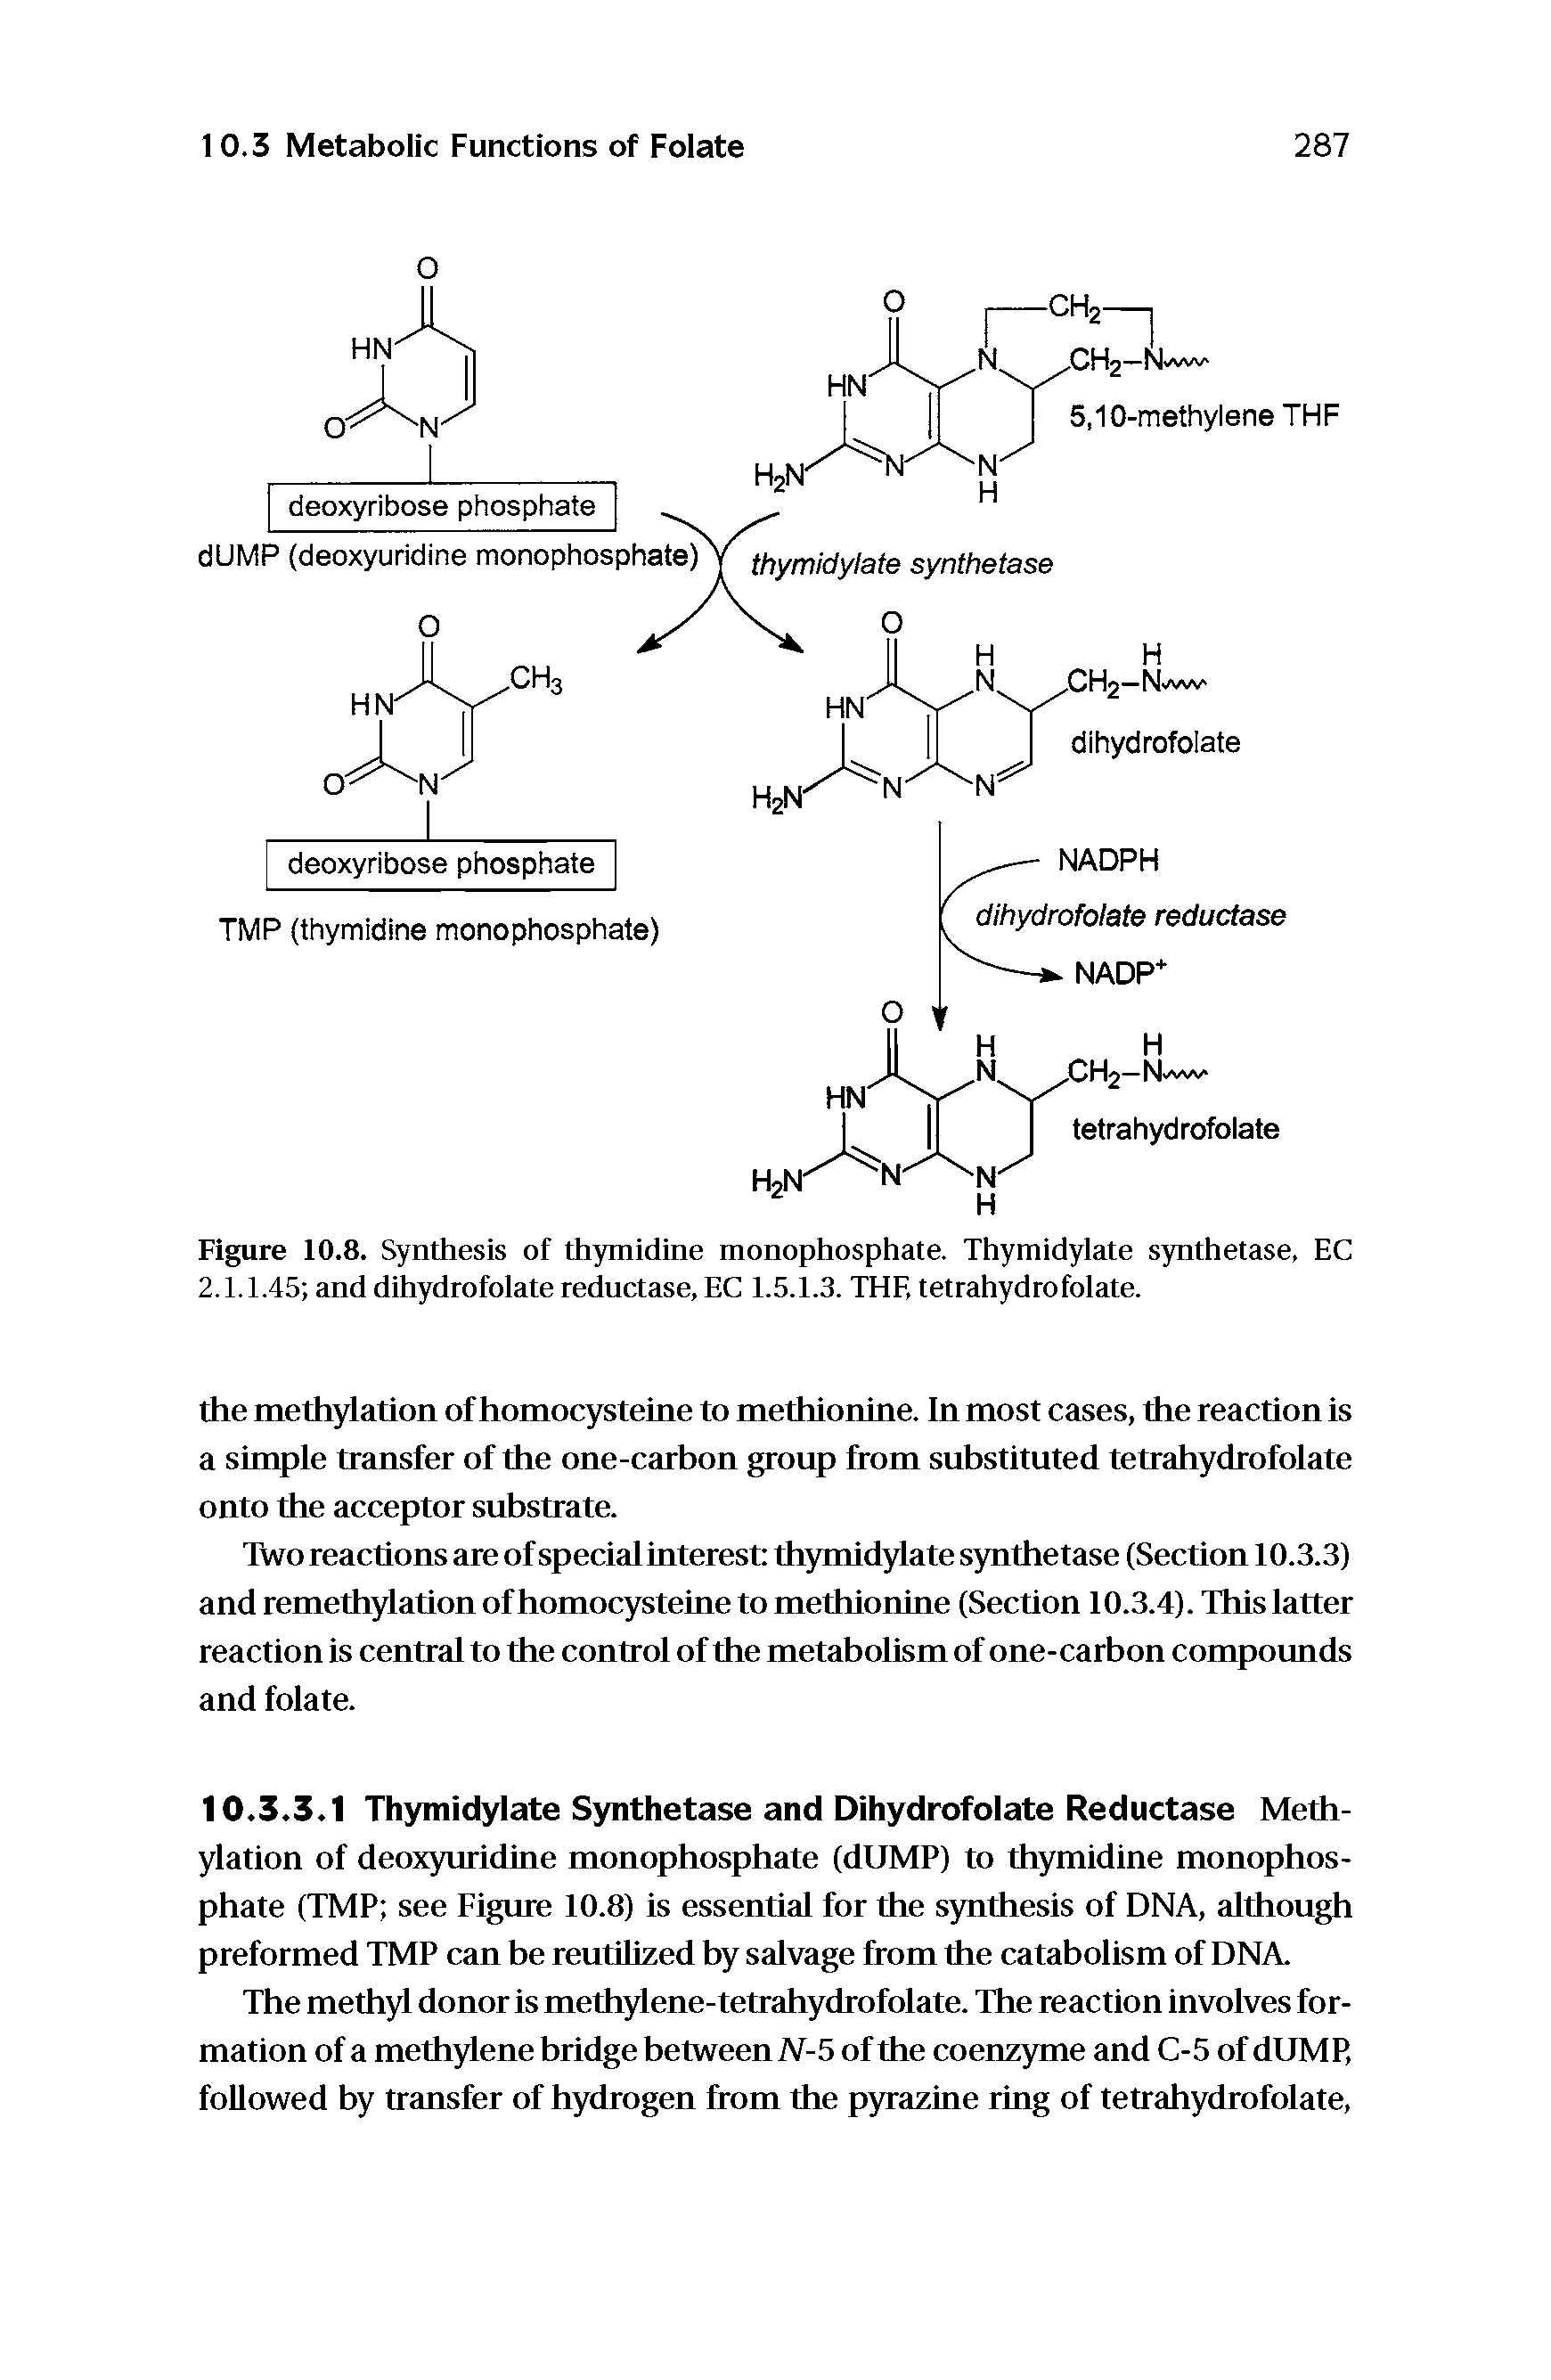 Figure 10.8. Synthesis of thymidine monophosphate. Thymidylate synthetase, EC 2.1.1.45 and dihydrofolate rednctase, EC I.5.I.3. THE tetrahydrofolate.